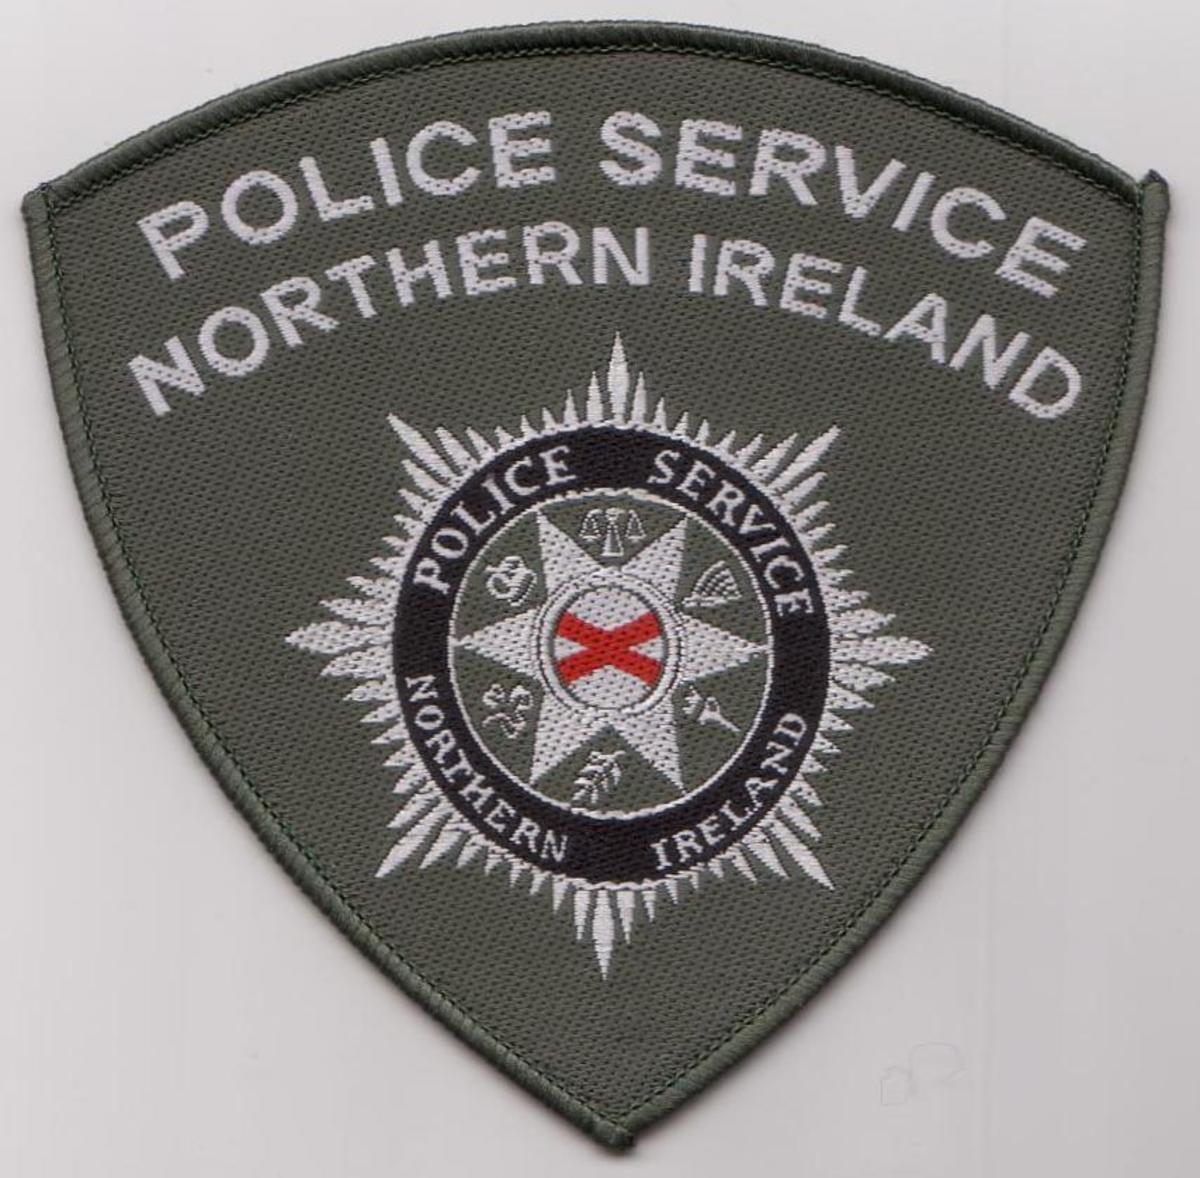 The badge for the new Police Service of Northern Ireland carefully includes six symbols to give a balanced representation of Northern Ireland.